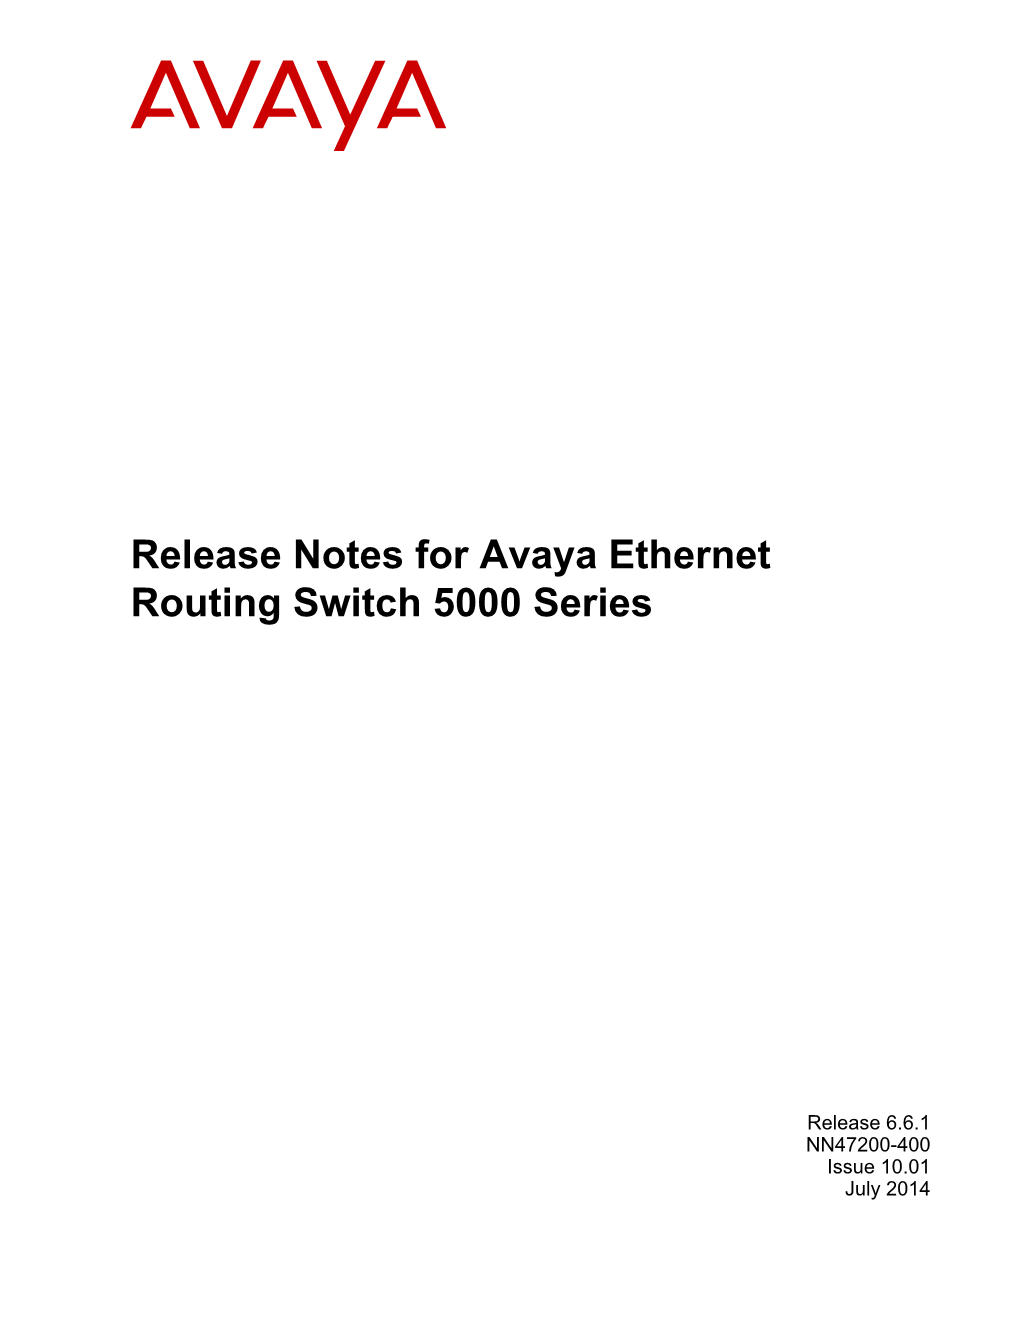 Release Notes for Avaya Ethernet Routing Switch 5000 Series